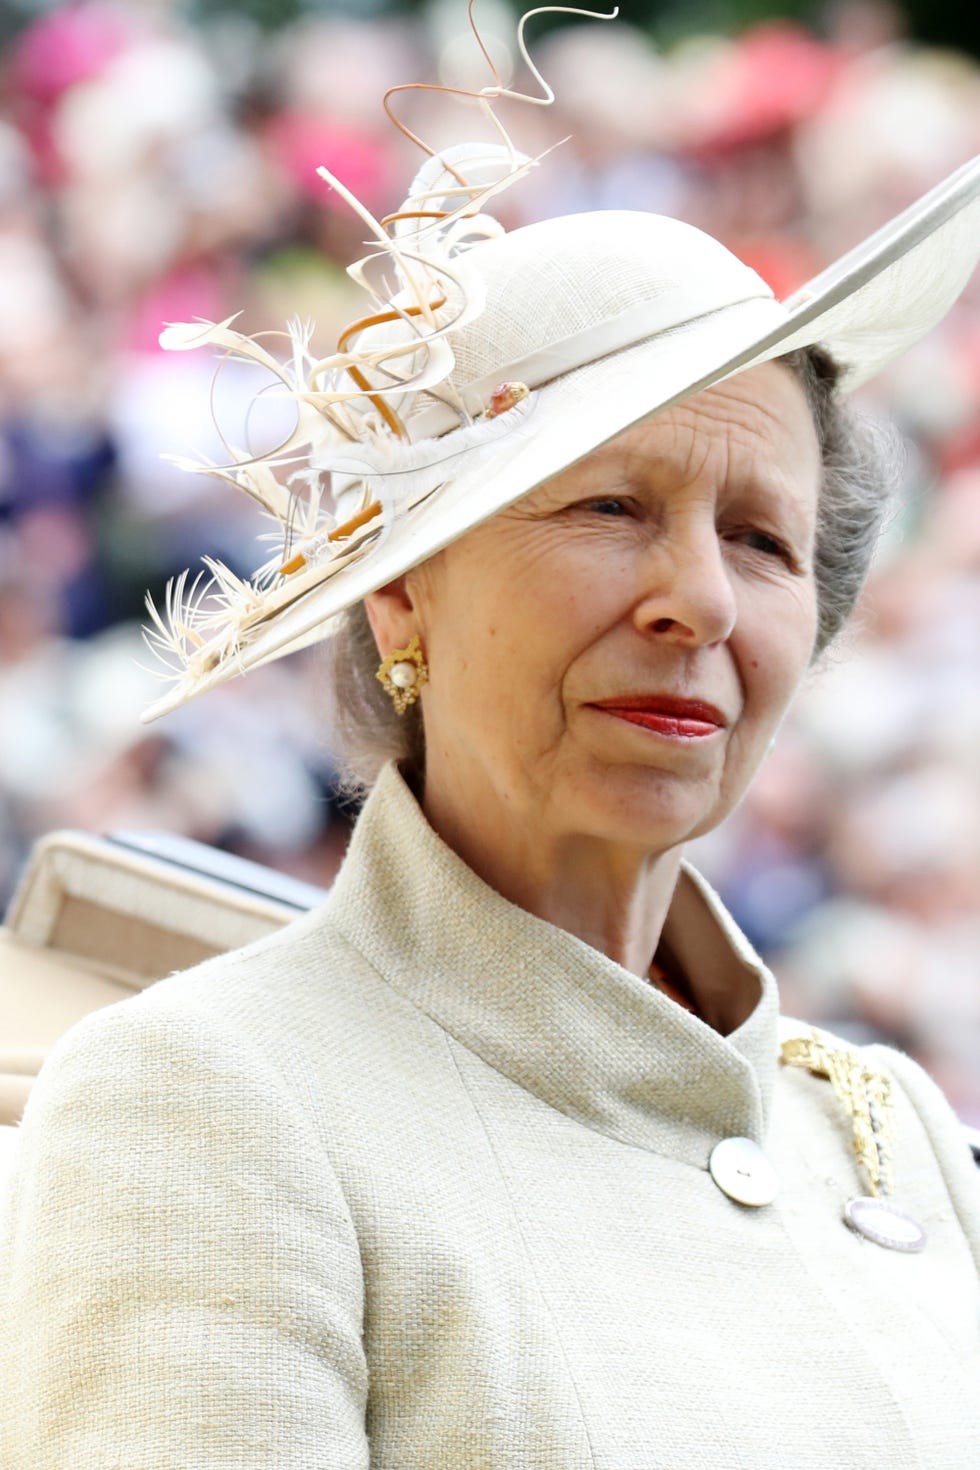 https://hips.hearstapps.com/hmg-prod.s3.amazonaws.com/images/hbz-royal-ascot-hats-princess-anne-gettyimages-978638120-1529432844.jpg?crop=1xw:1xh;center,top&resize=980:*